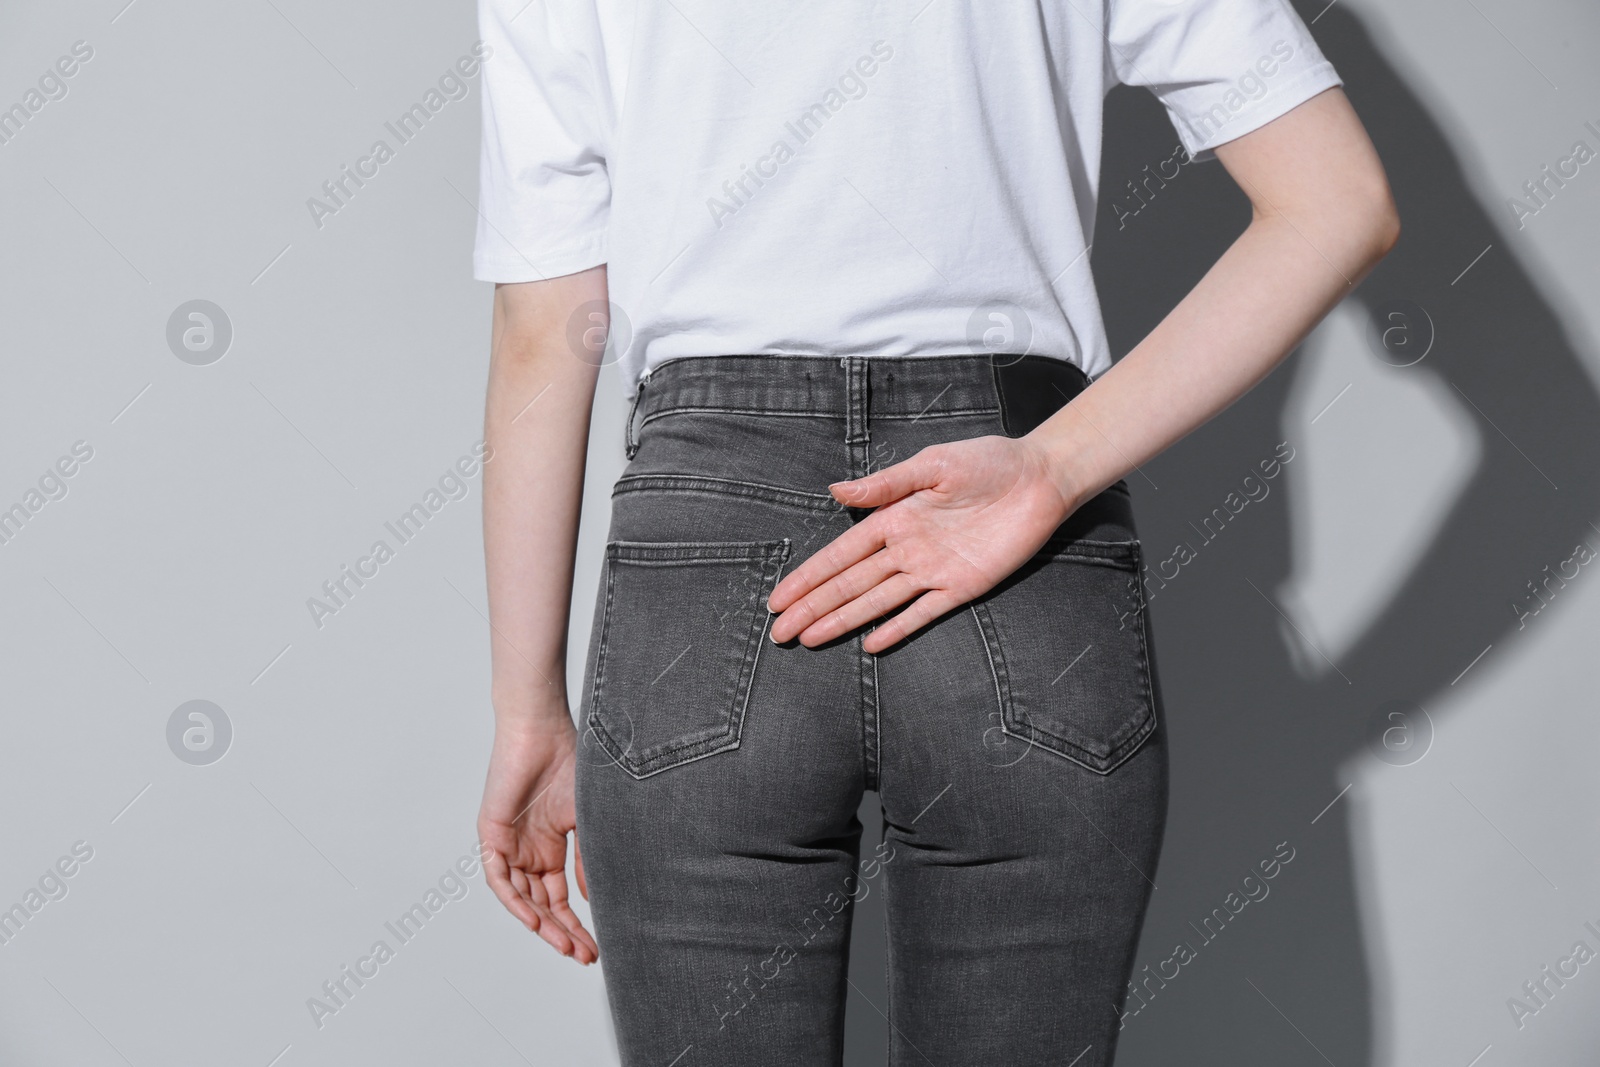 Photo of Woman showing open palm behind her back on light background, back view